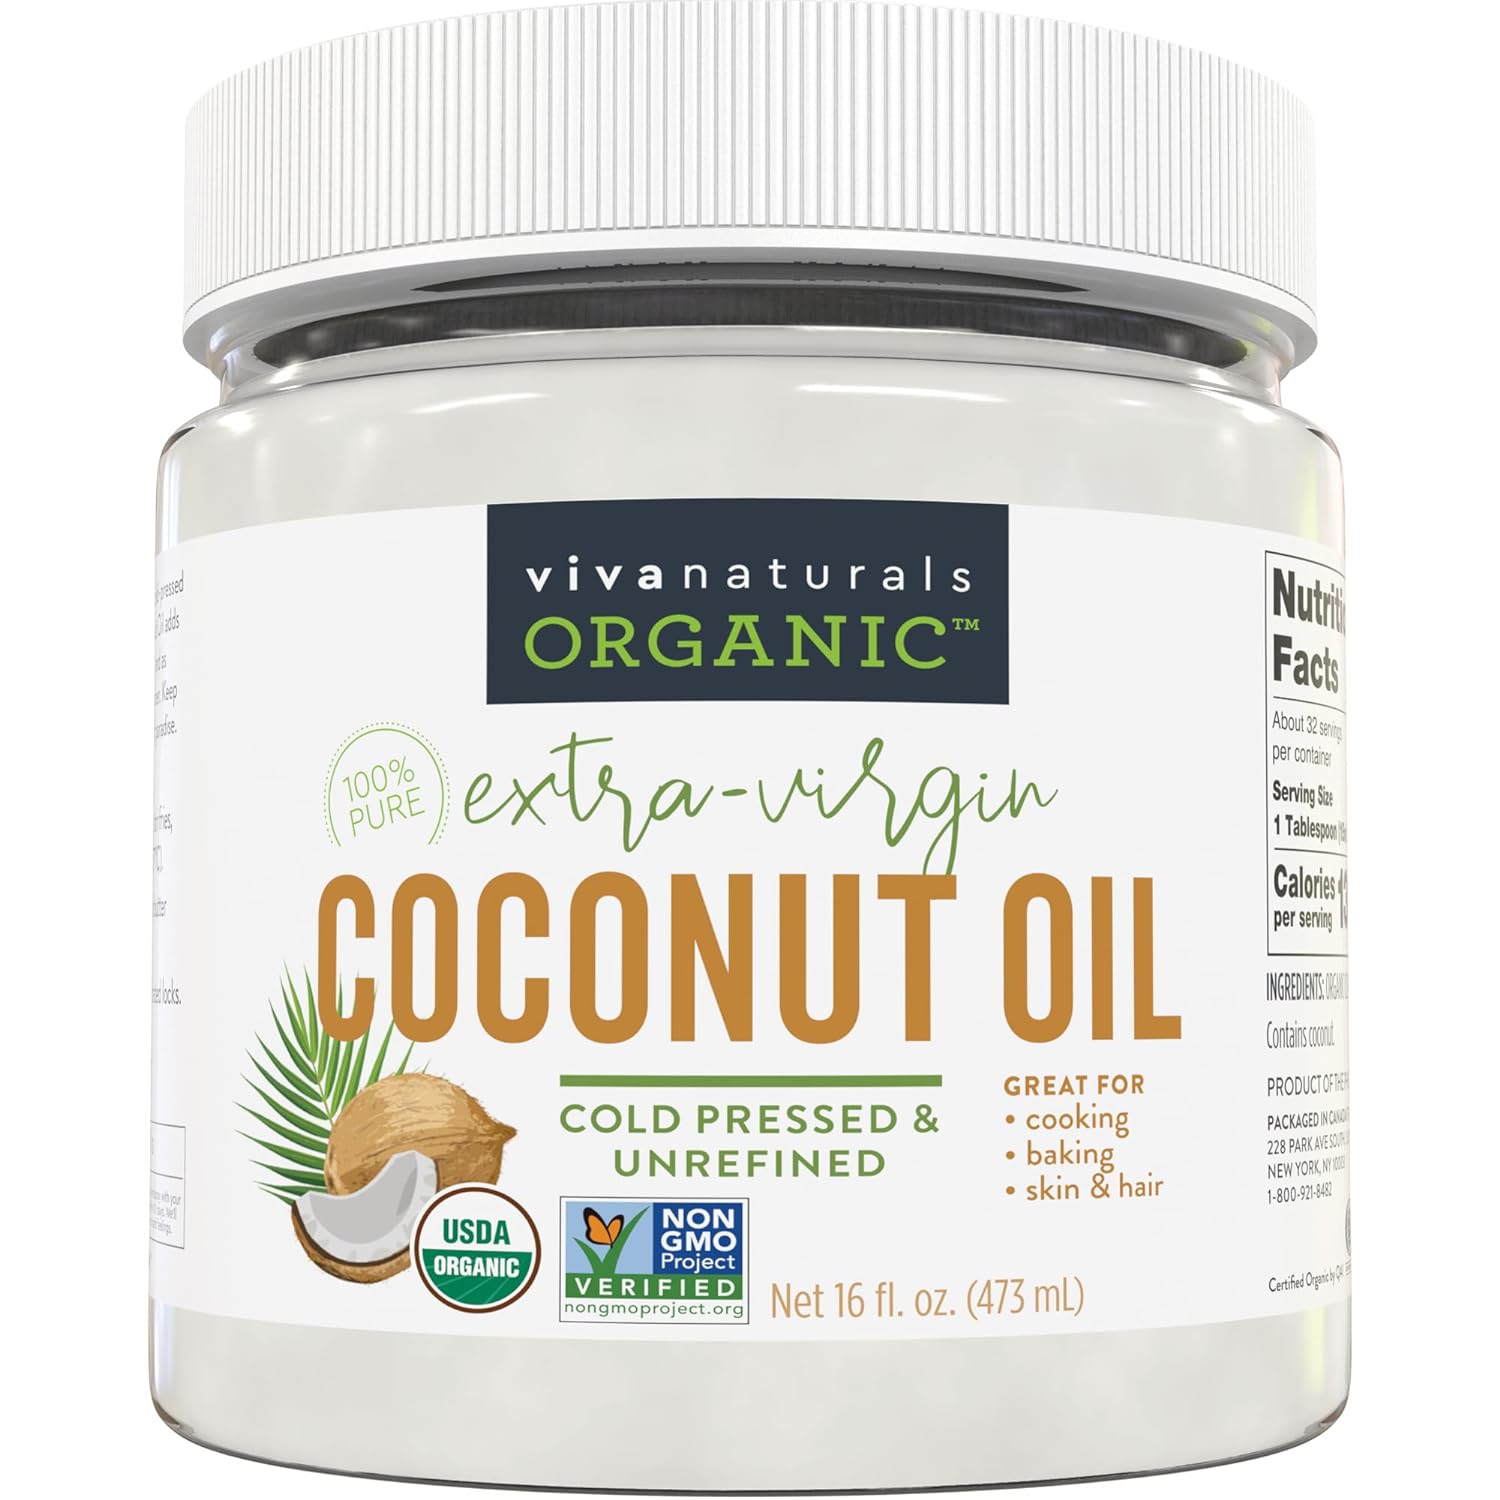 Virgin Coconut Oil, 16 fl oz - Non-GMO, Cold-Pressed and Unrefined Coconut Oil Organic Certified - Natural Flavour Coconut Oil for Cooking and Baking